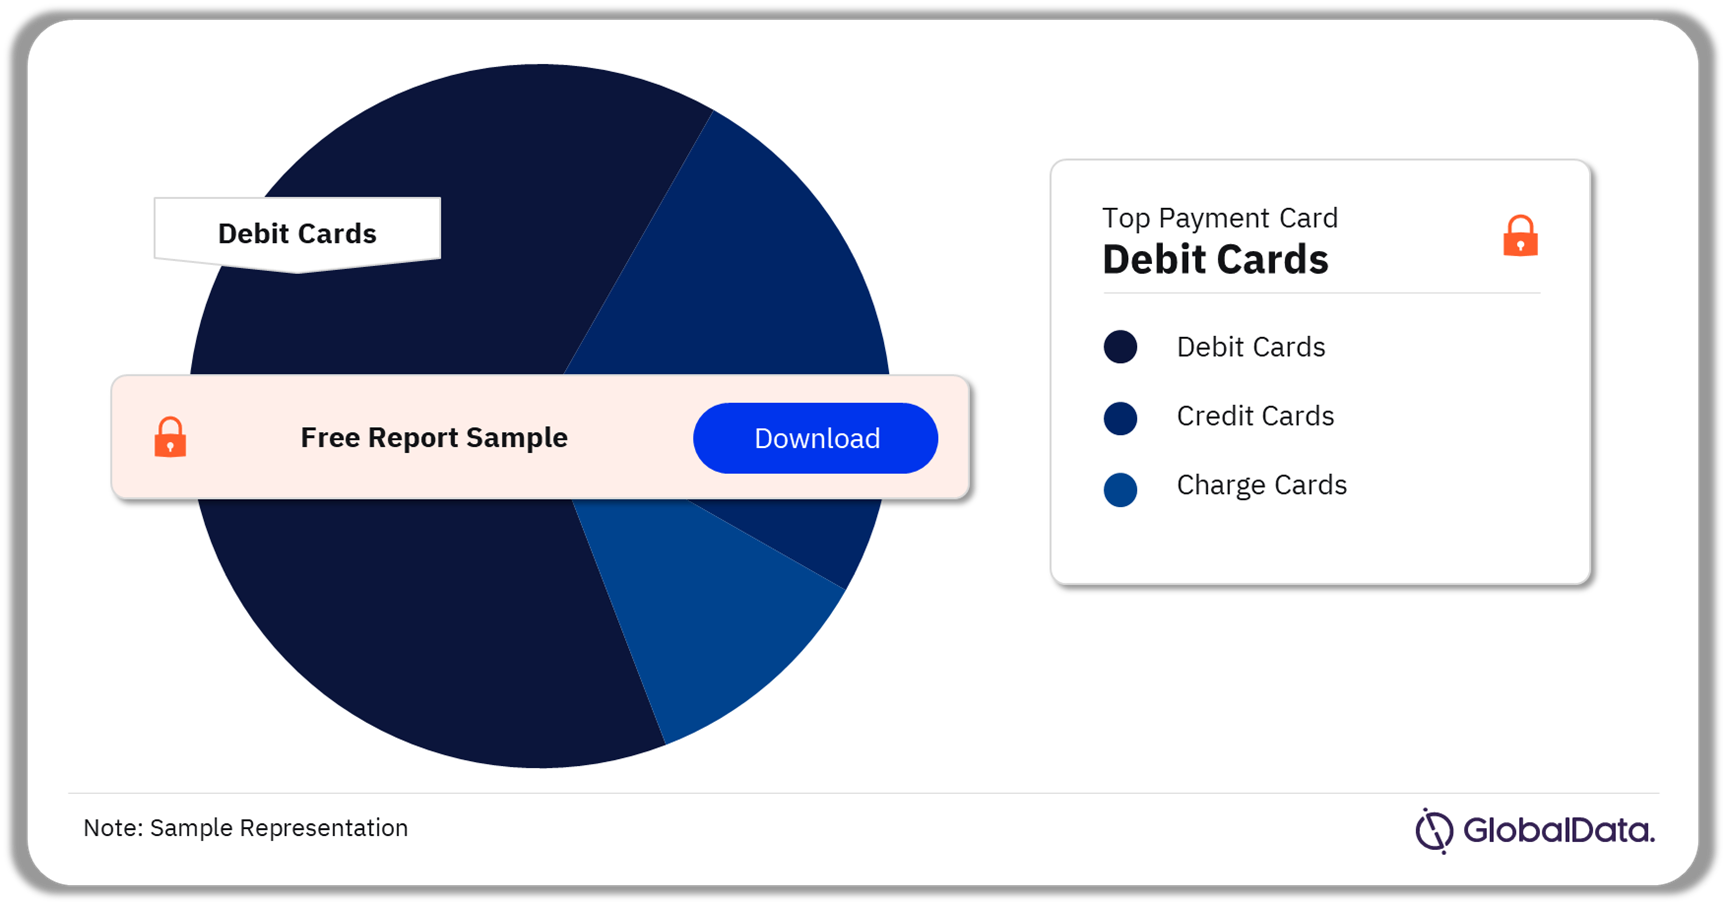 France Card-Based Payments Market Analysis, 2023 (%)